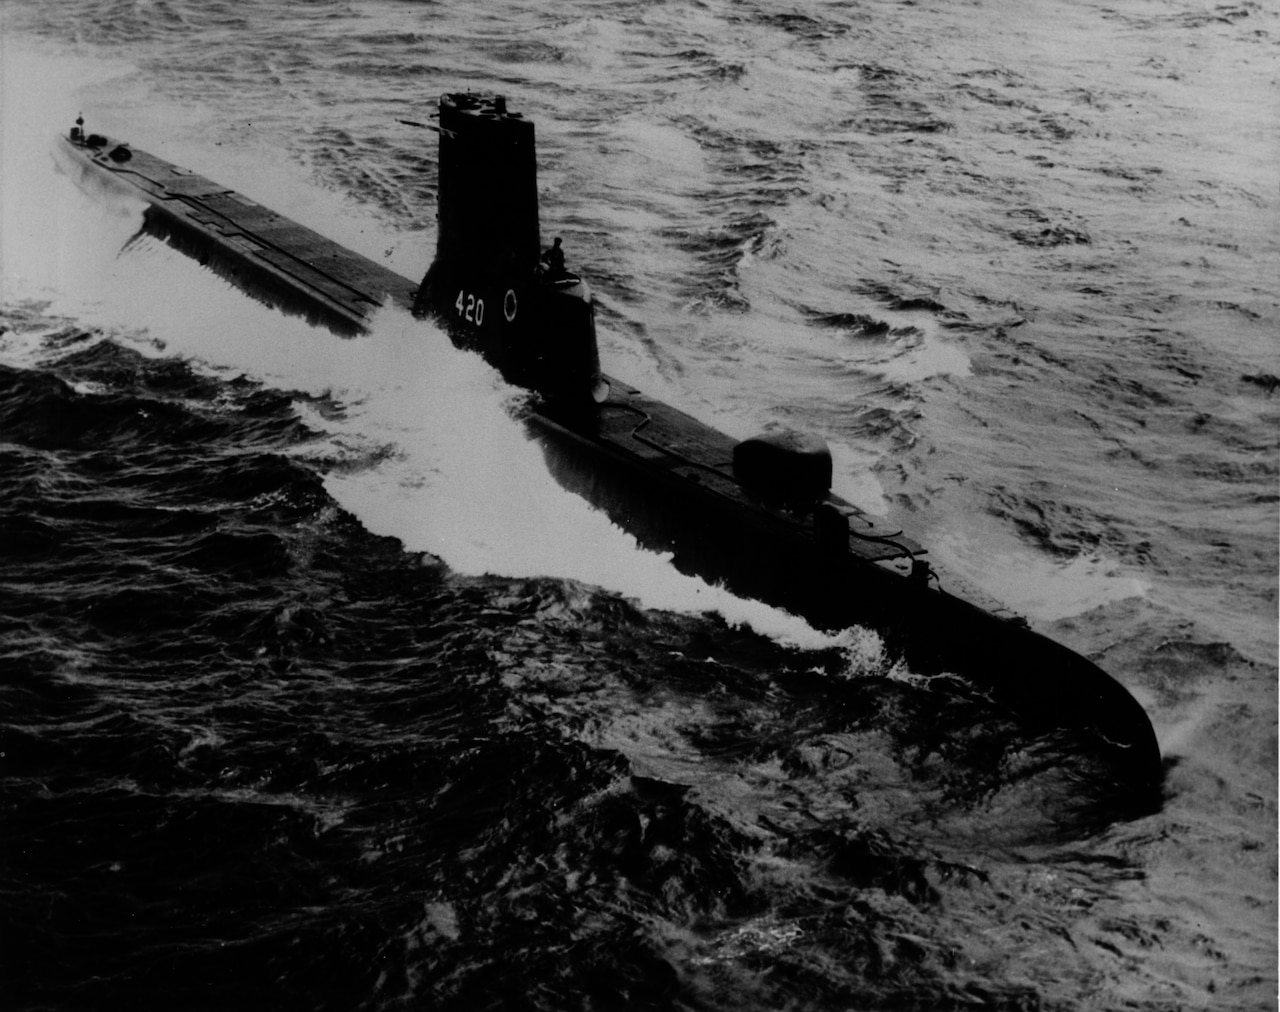 A submarine moves on the surface of the water.